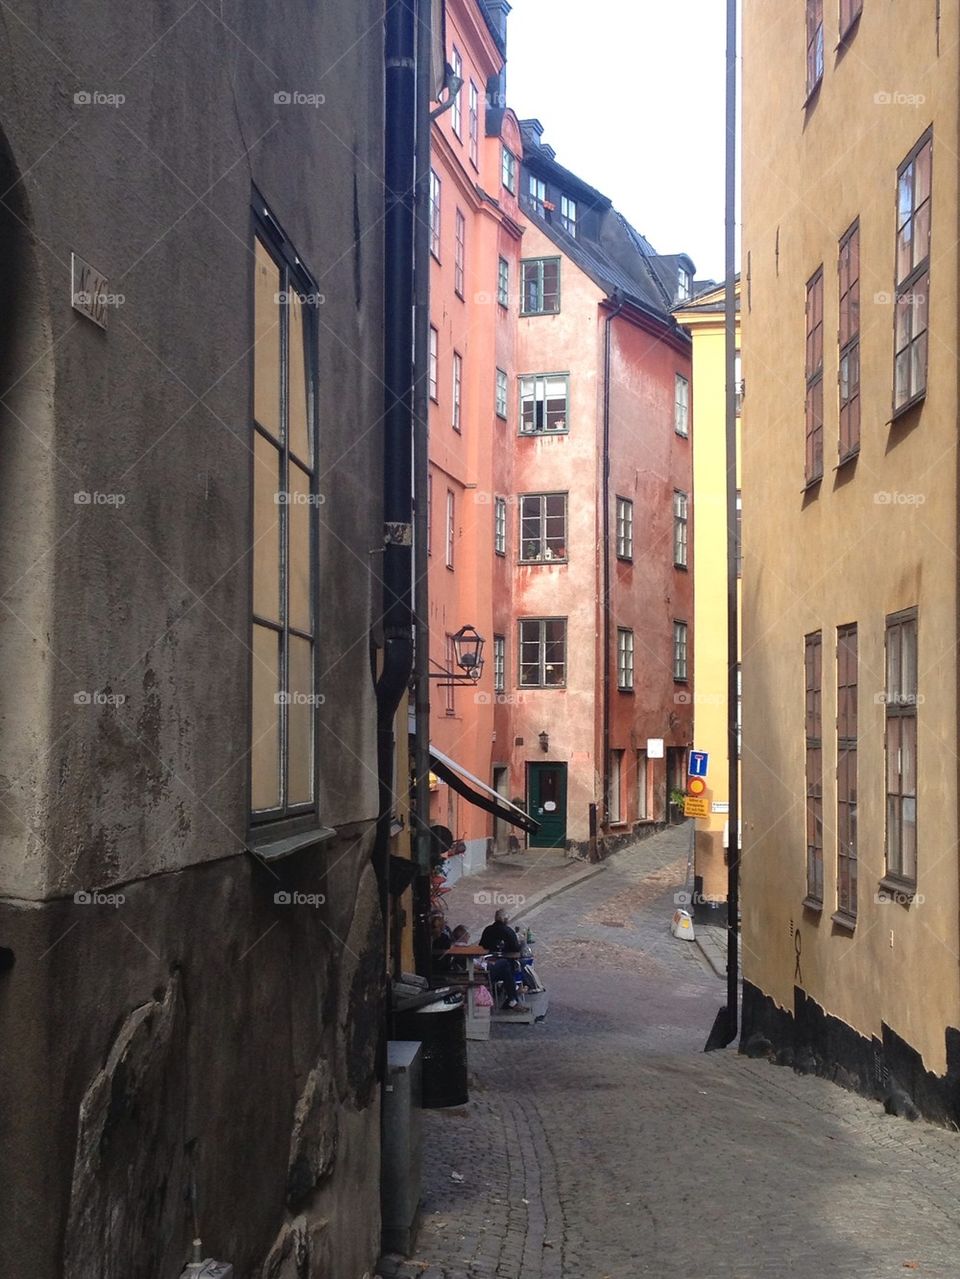 Gamla Stan, The old town in Stockholm